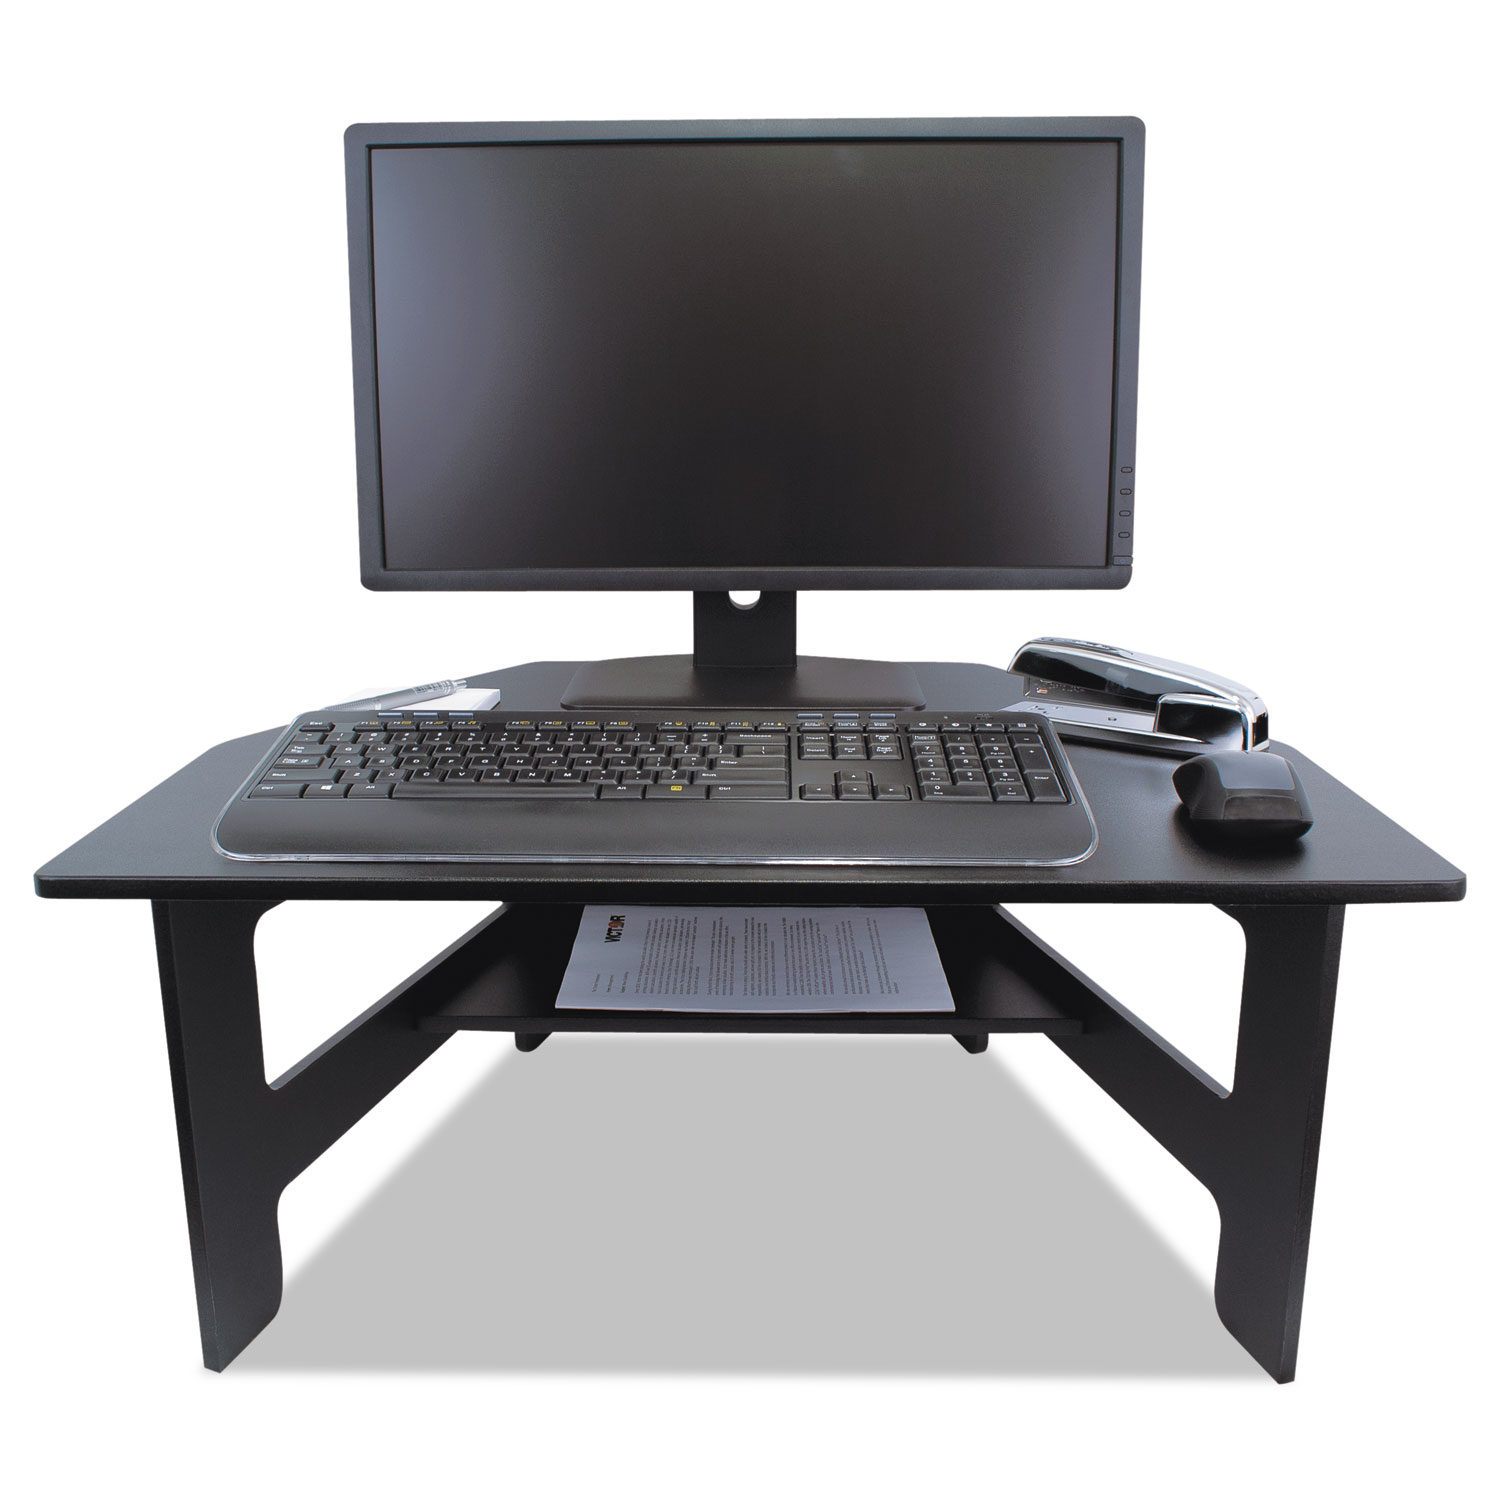  Victor DC100 High Rise Stand-Up Desk Converter, 28w x 23d x 12 to 14.5h, Black (VCTDC100) 